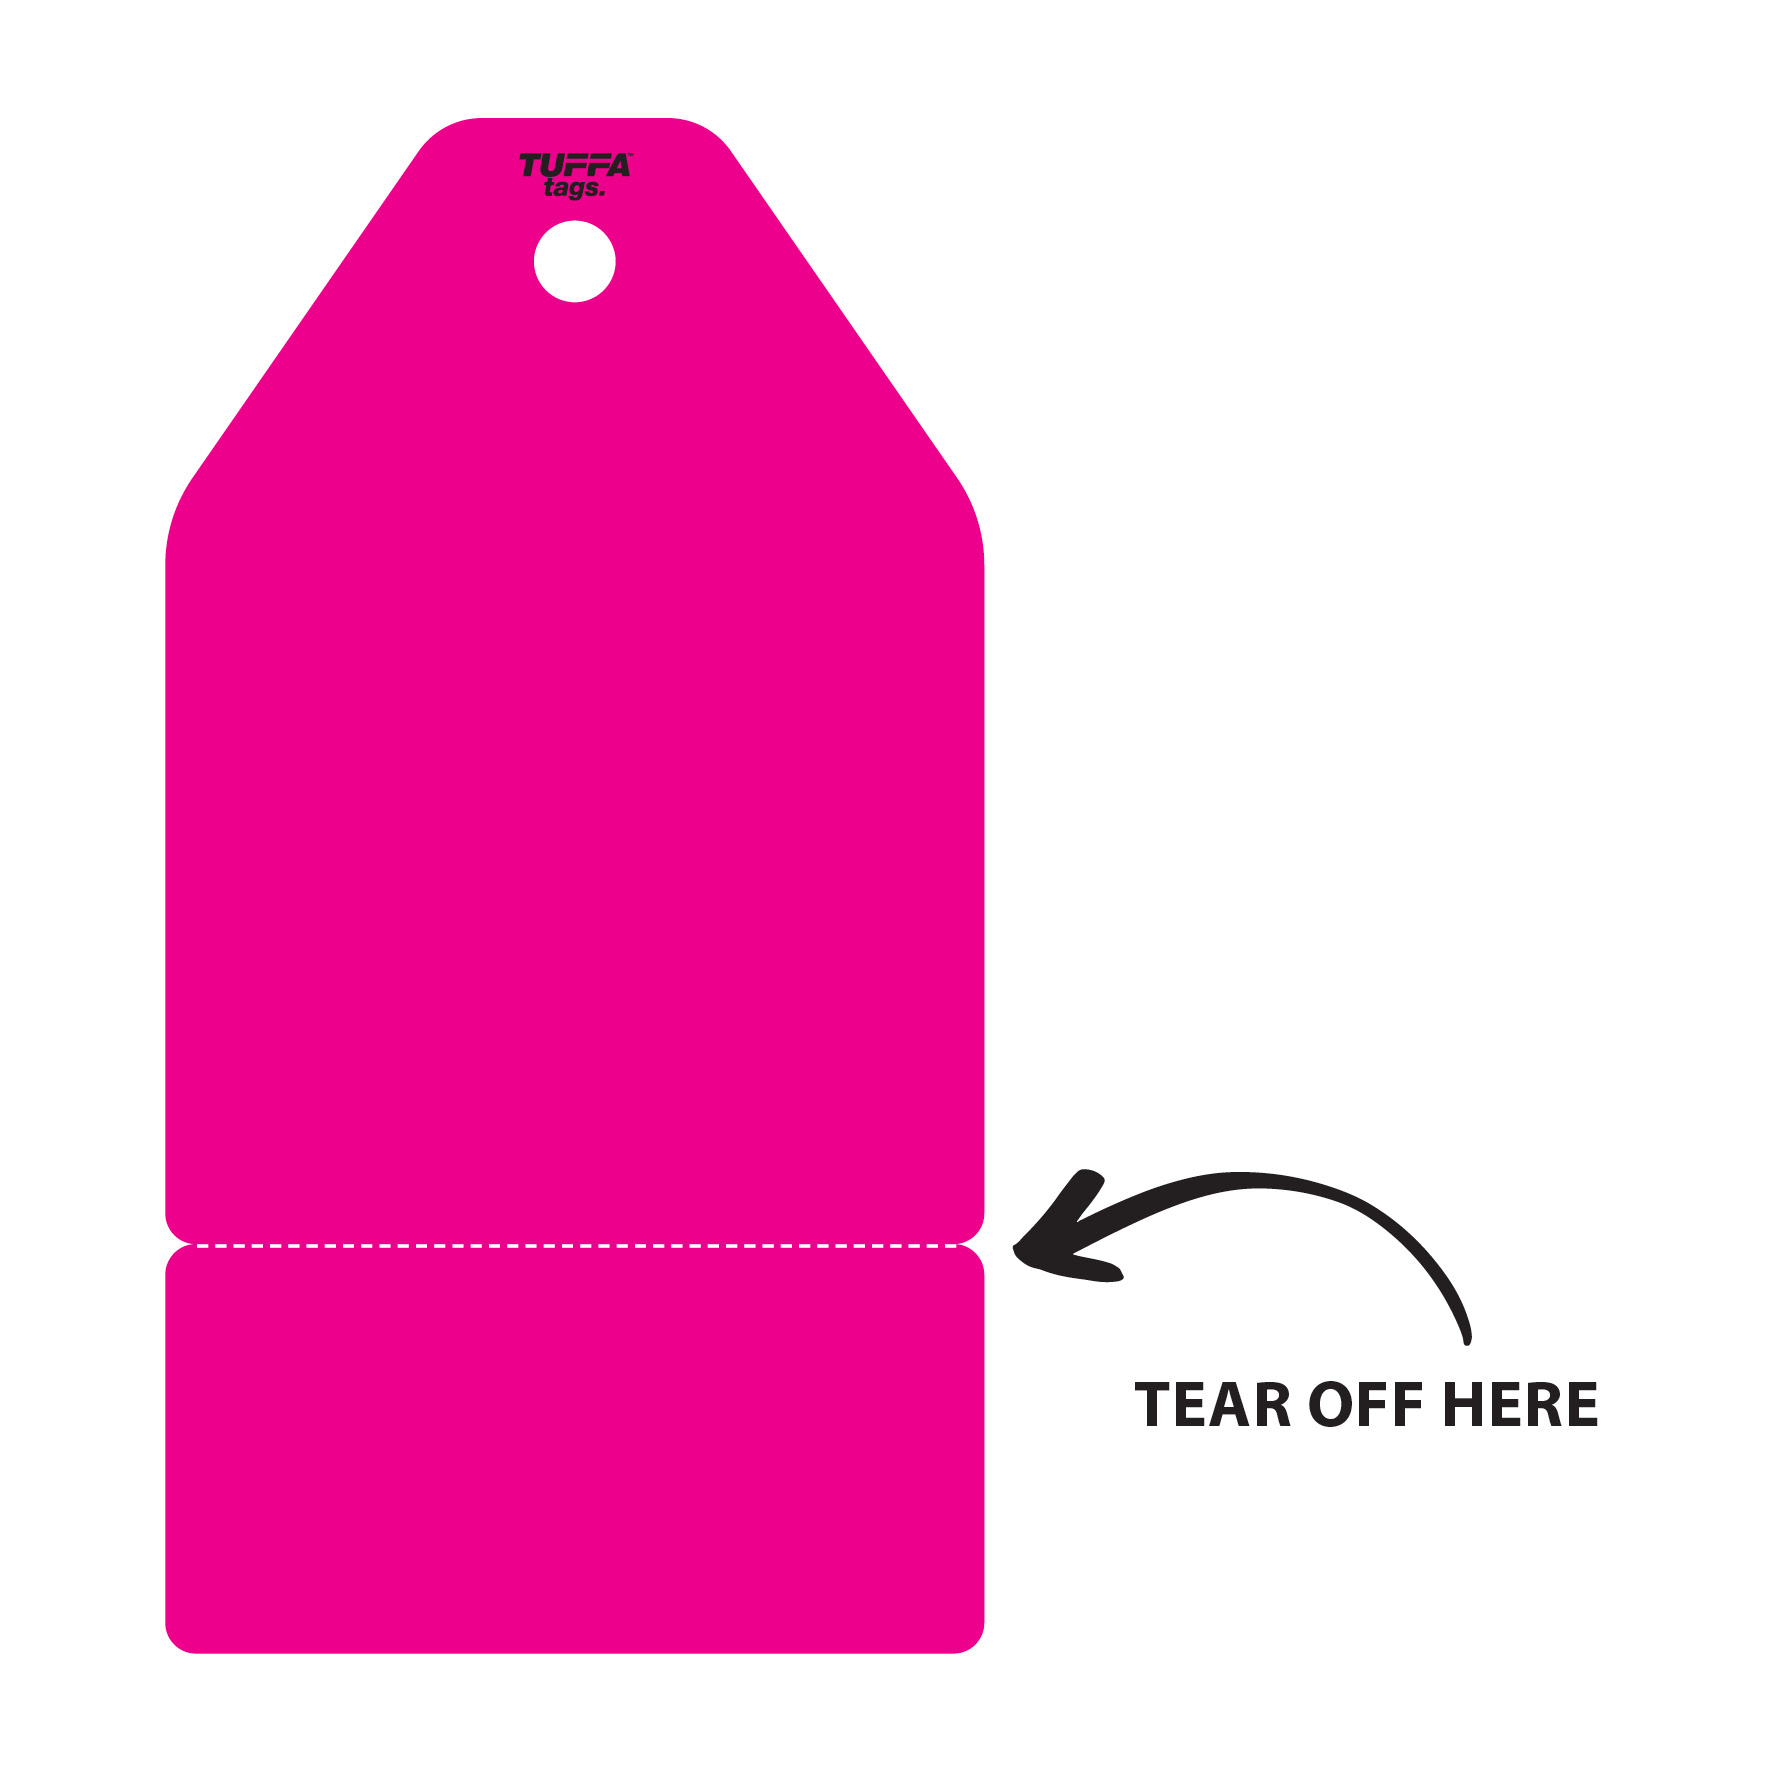 Pink Plain TUFFA Tags - 150mm x 80mm (Tear off Section) (packs of 100)